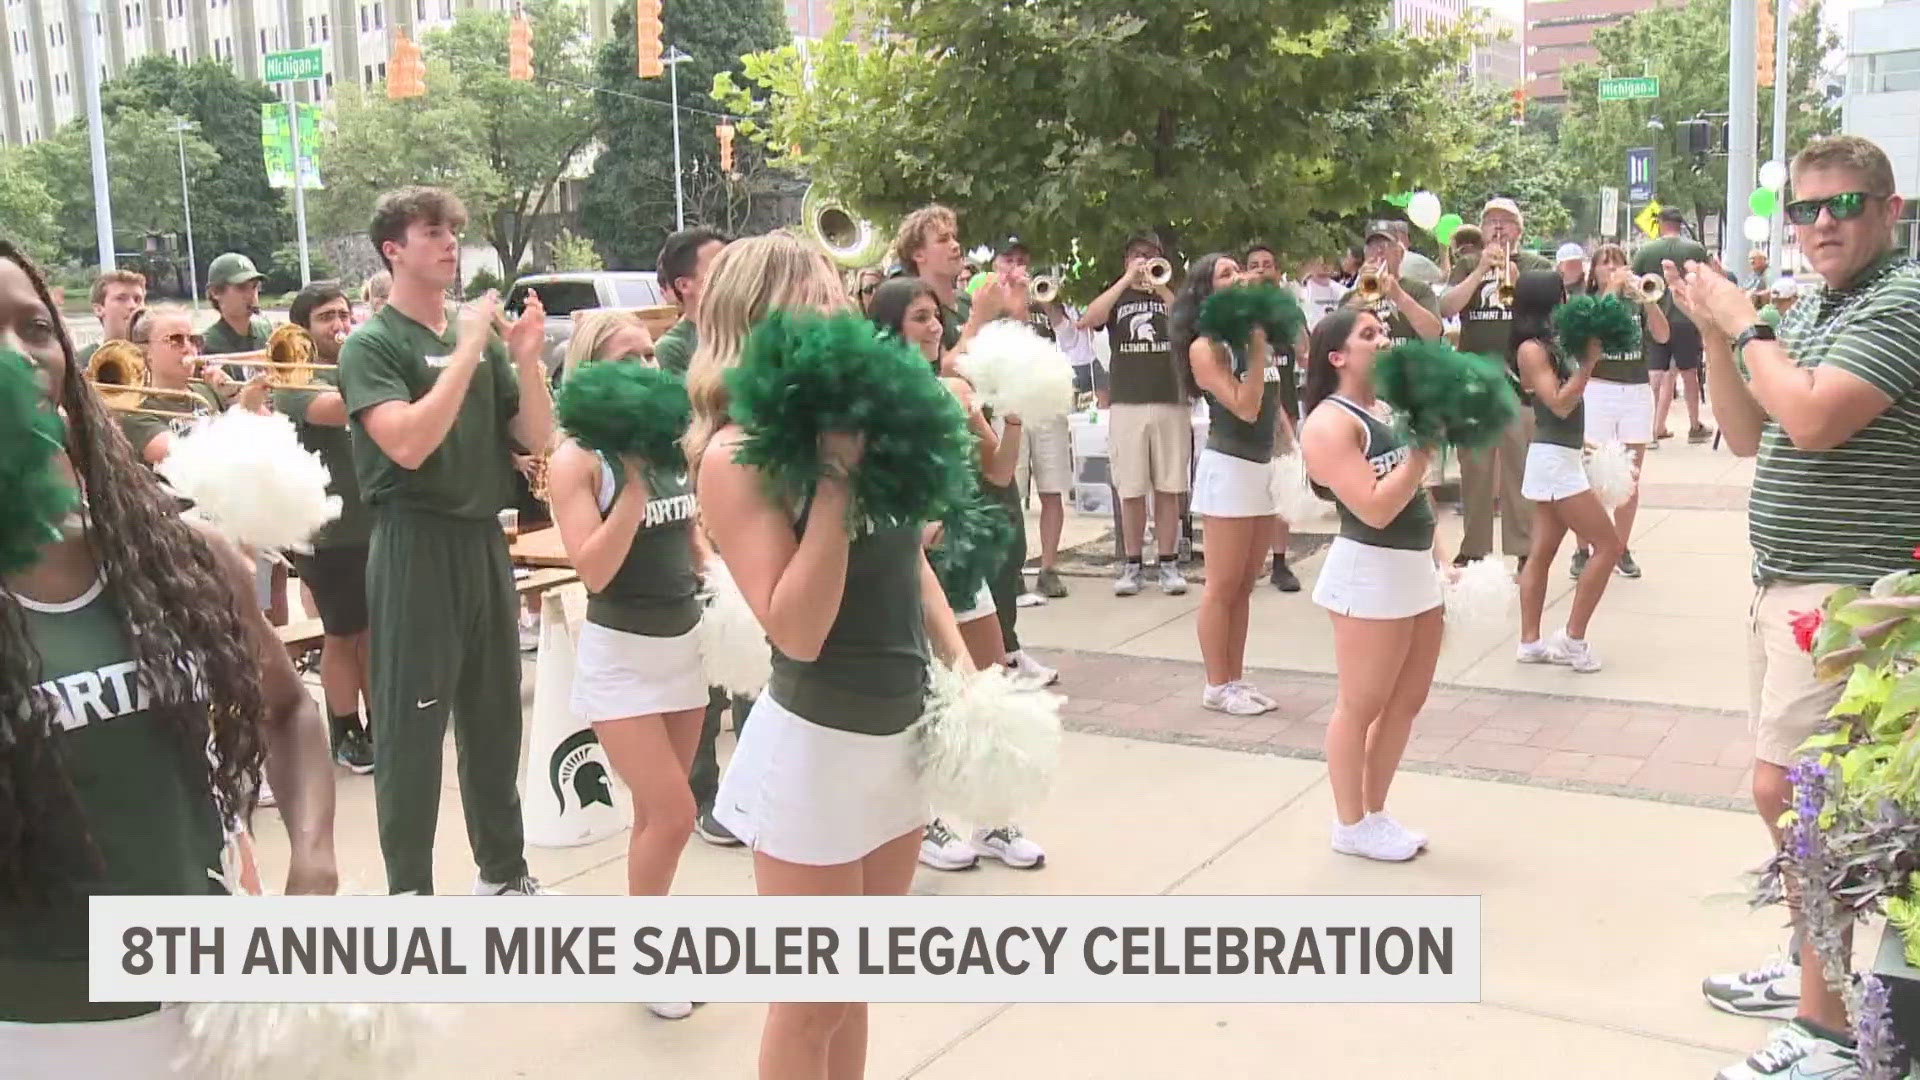 Sadler is a former MSU kicker who passed away in 2016 after a car crash.